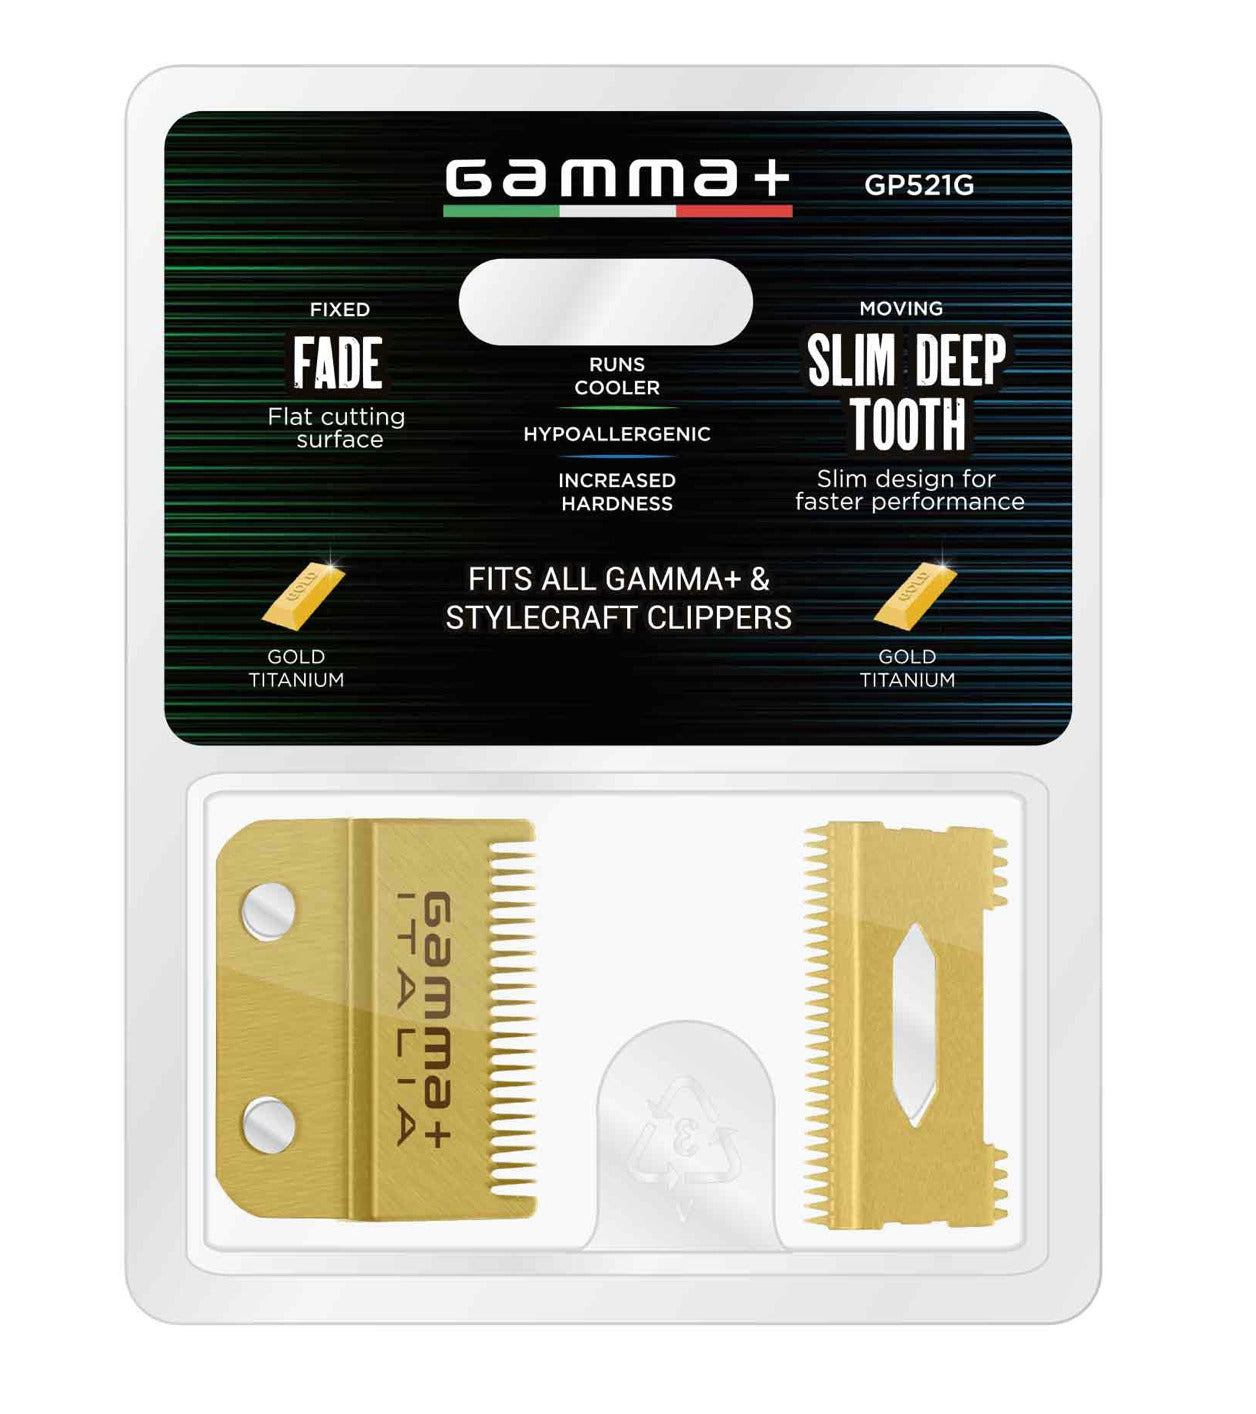 Gamma+ REPLACEMENT FIXED GOLD TITANIUM FADE CLIPPER BLADE WITH GOLD TITANIUM MOVING SLIM DEEP TOOTH CUTTER SET